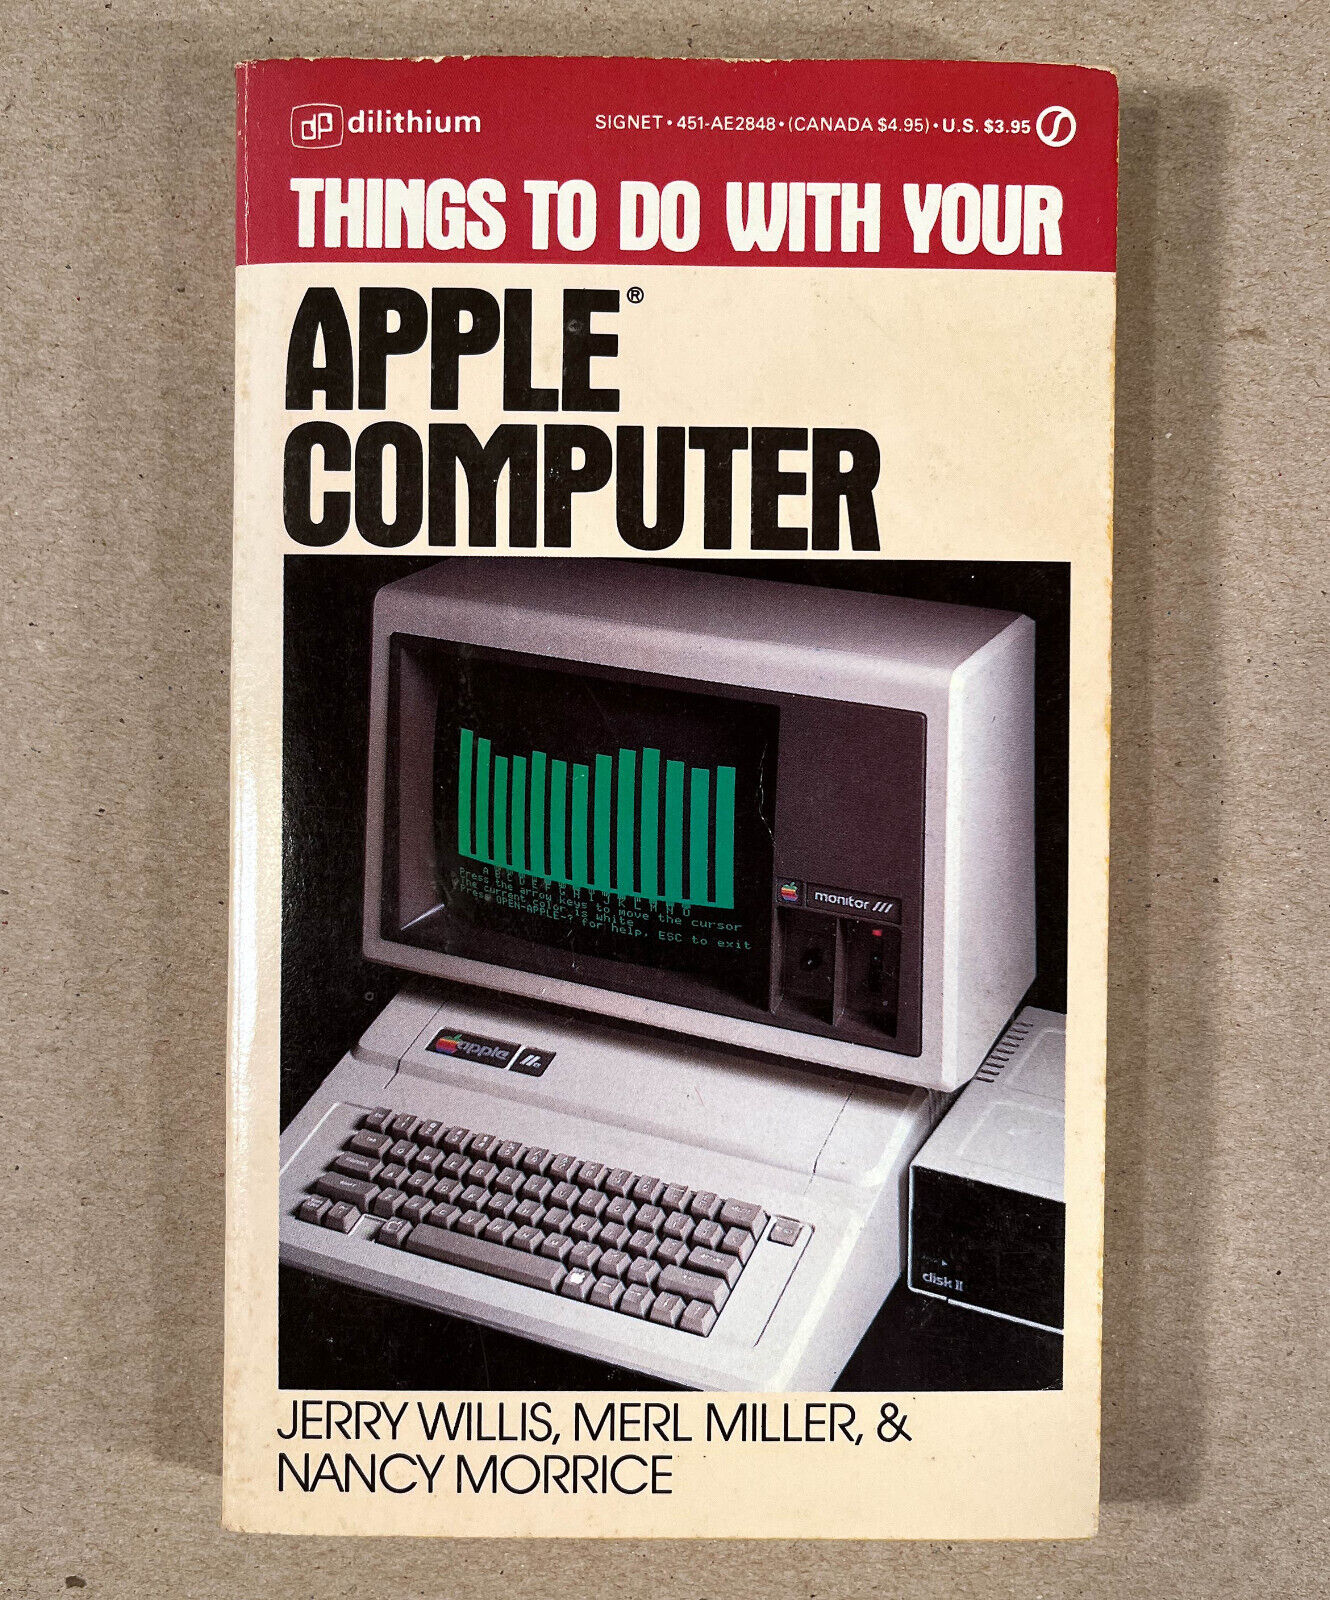 THINGS TO DO WITH YOUR APPLE IIe COMPUTER, 1983 Signet First Edition Paperback